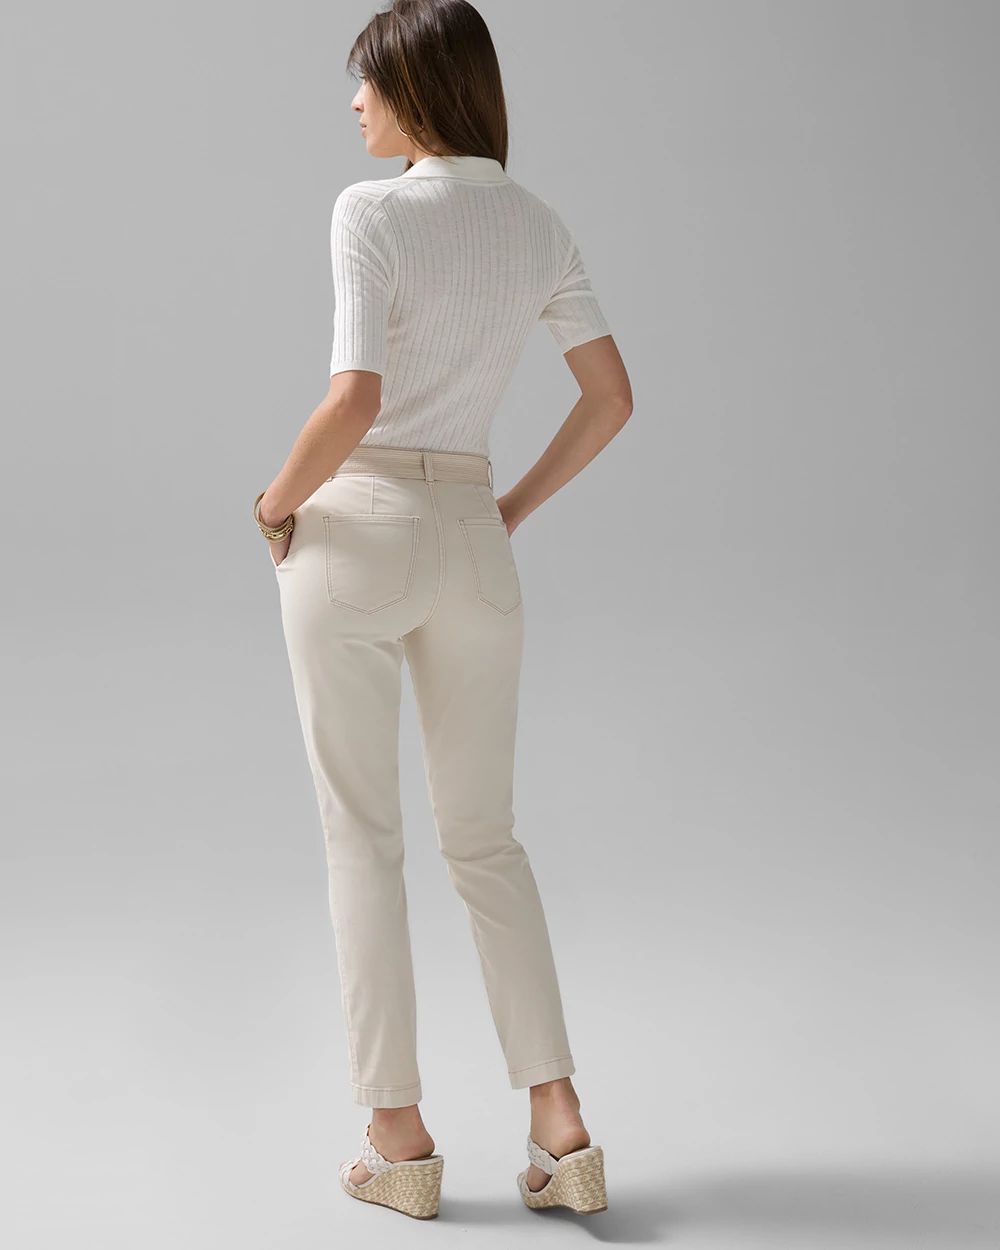 Pret High-Rise Belted Straight Cropped Pant